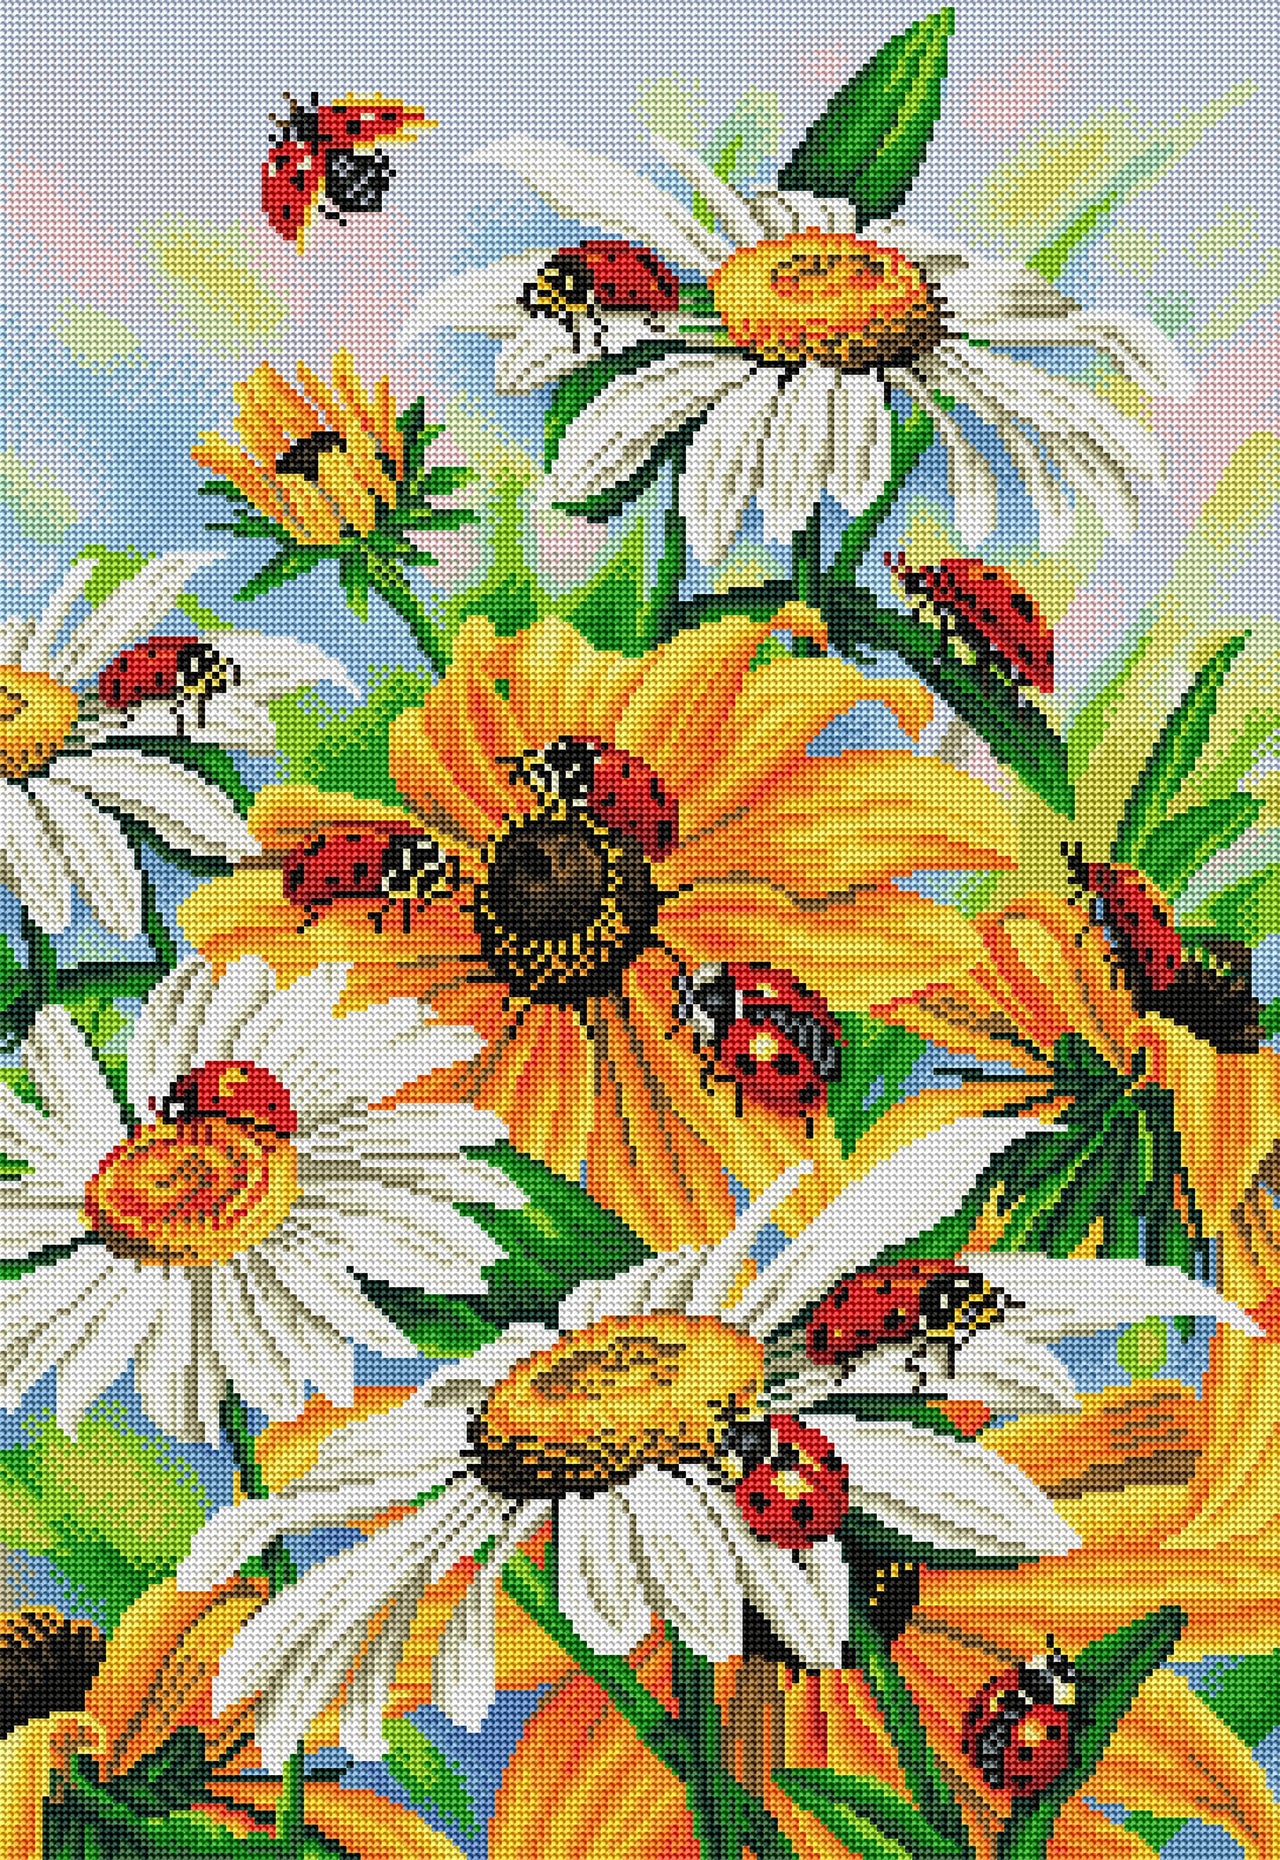 Diamond Painting Ladybug on Sunflower 20" x 29" (50.7cm x 73.7cm) / Round with 40 Colors including 3 ABs / 47,603